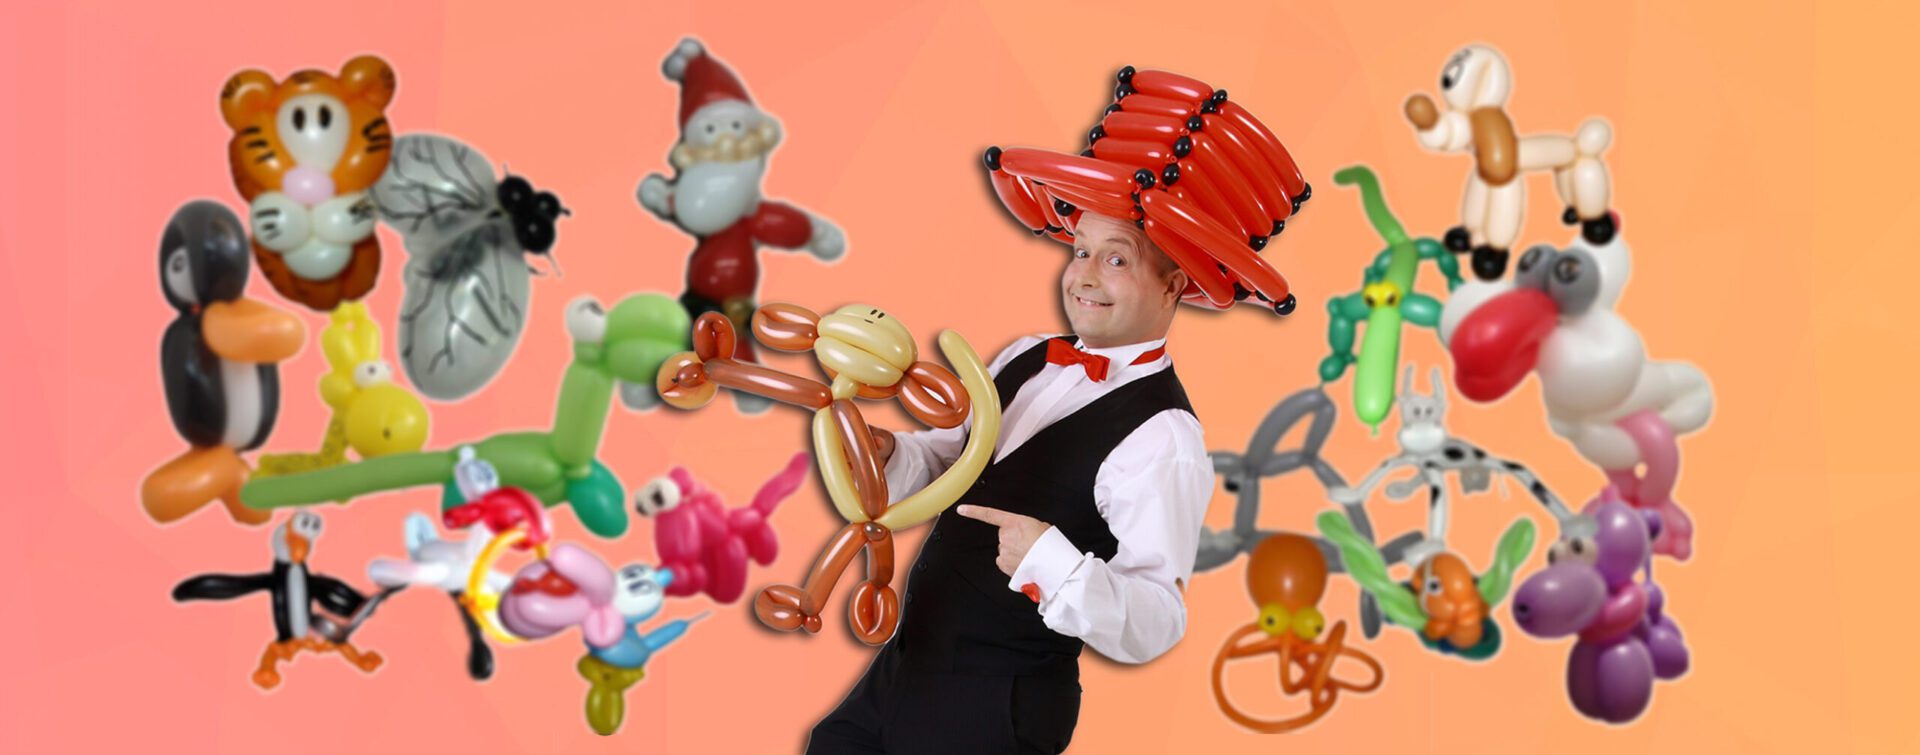 balloon artist - balloon animals and balloon hats for all kinds of events - major events, festival and company events.